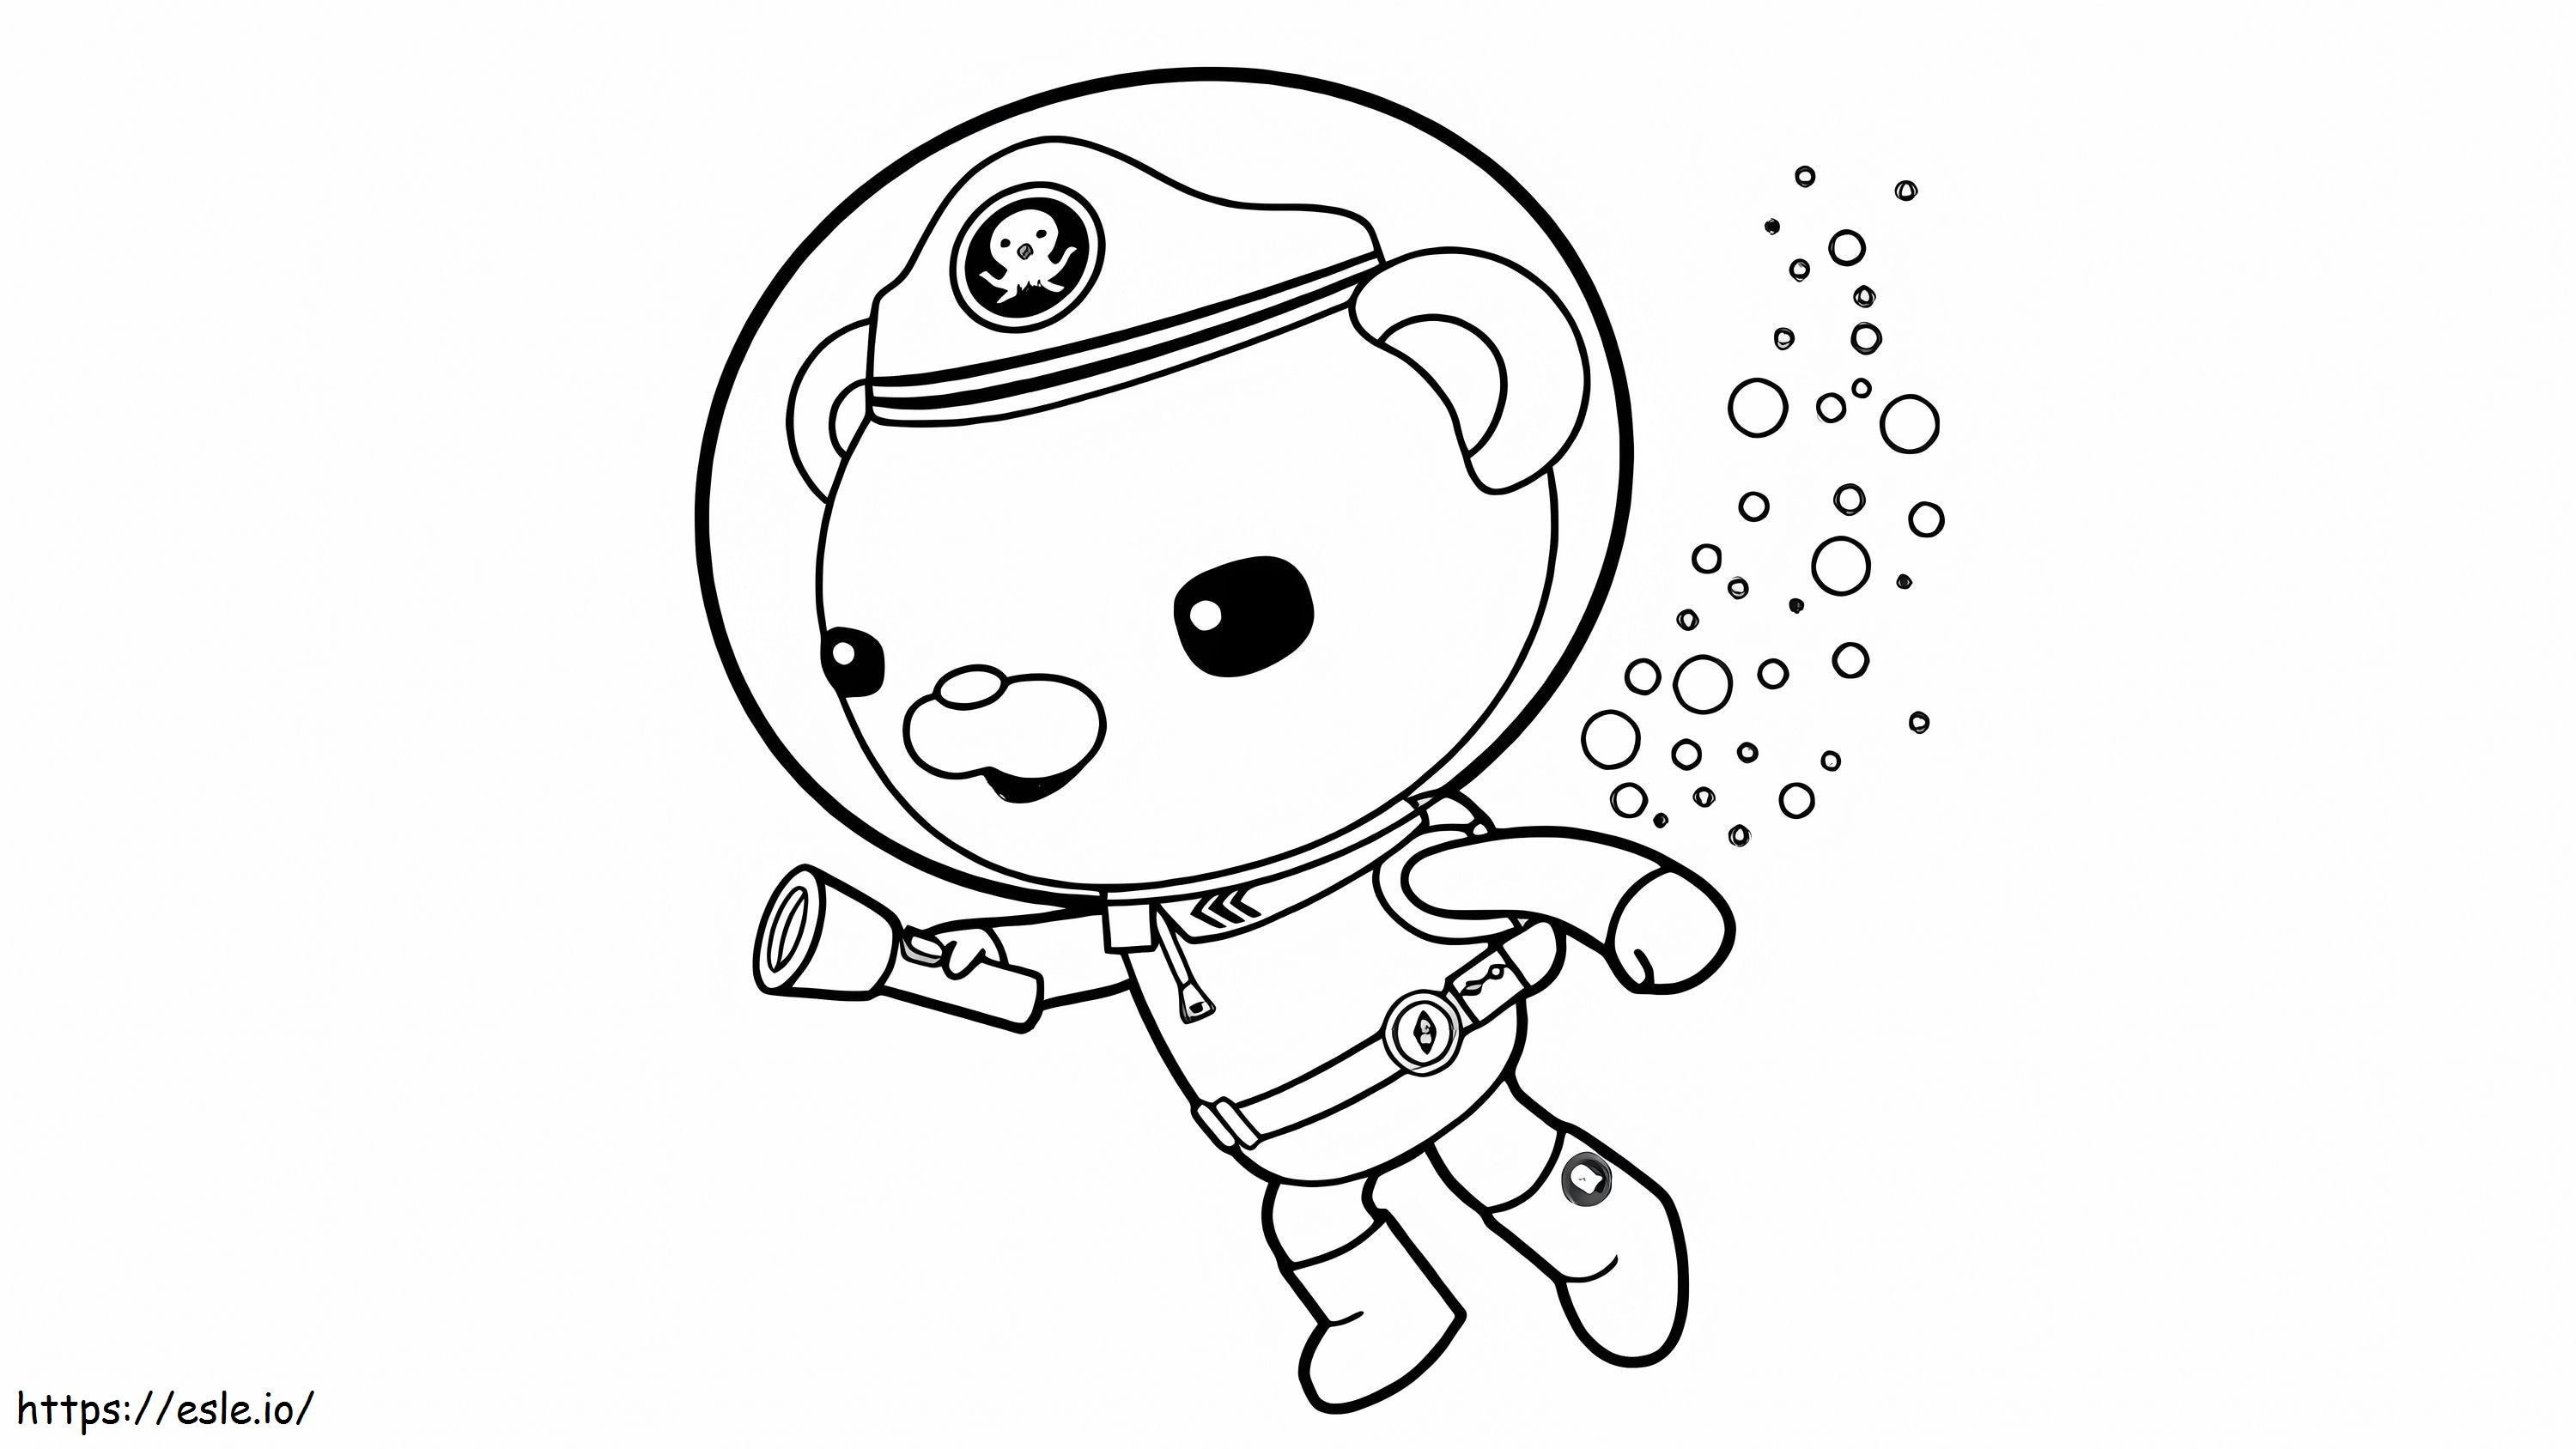 HQ Captain Barnacles Image coloring page